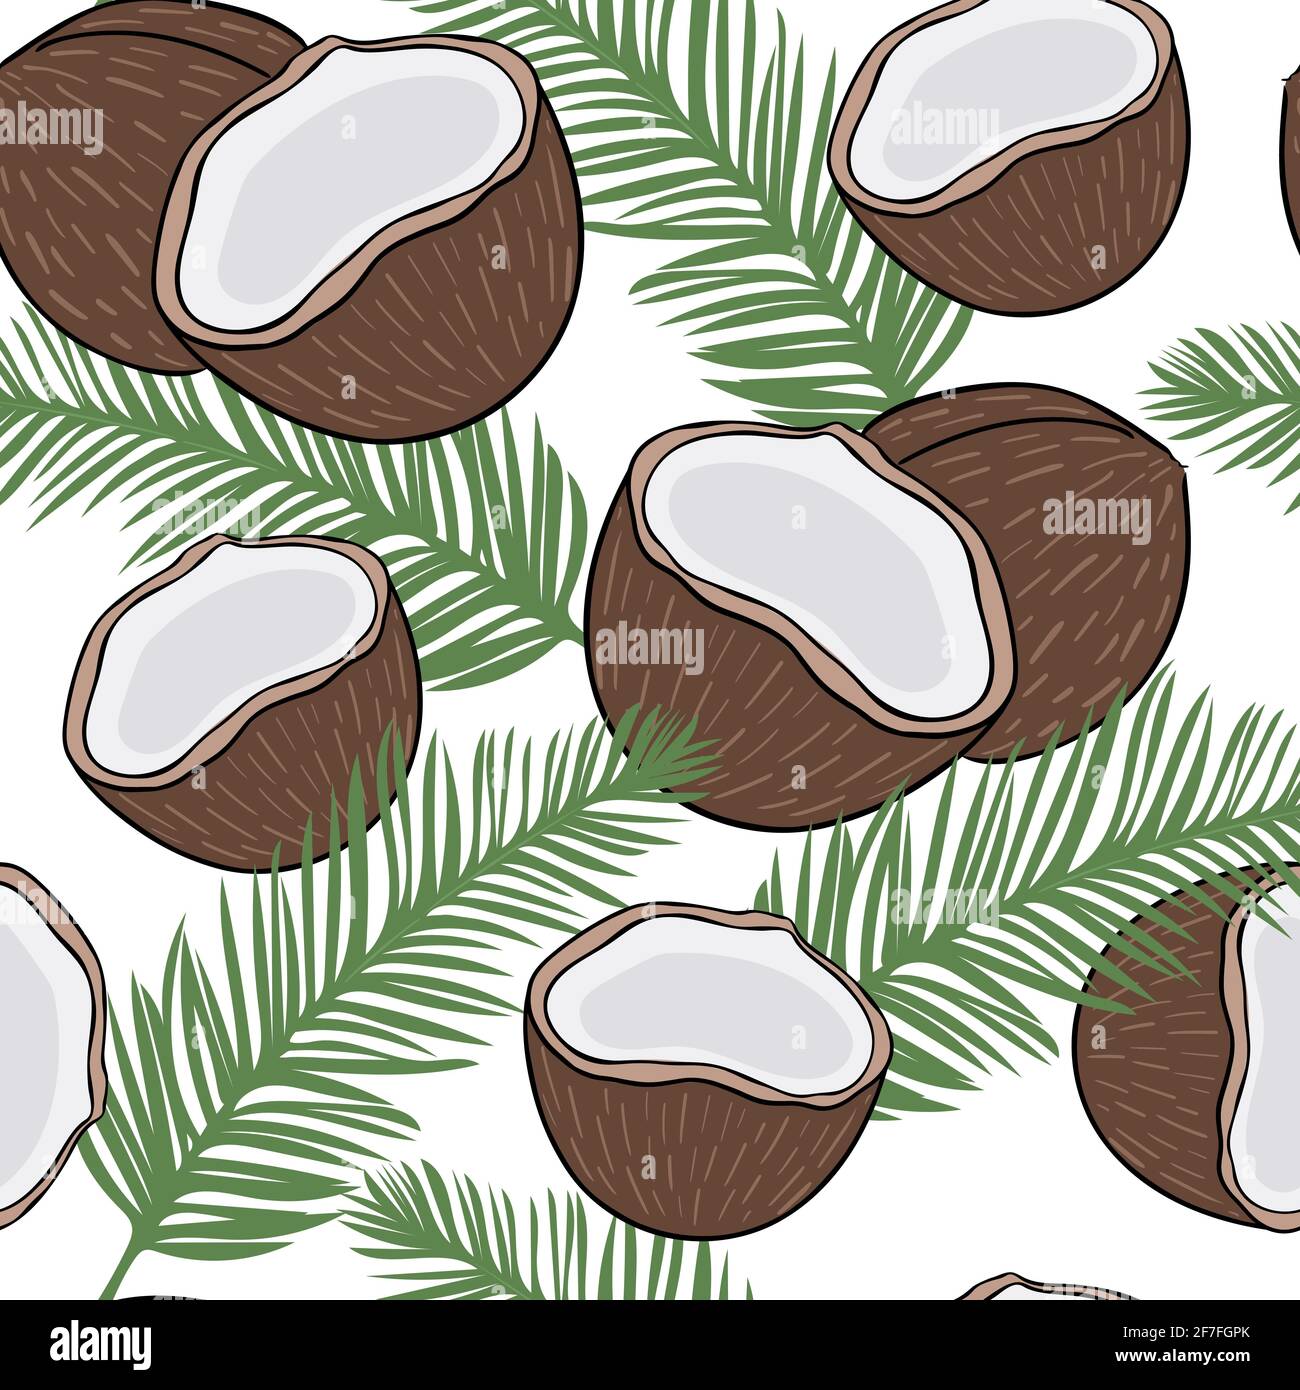 Seamless background with coconuts and palm branches. Solid repeating pattern with exotic fruits. Tropical paradise background for design and packaging Stock Vector